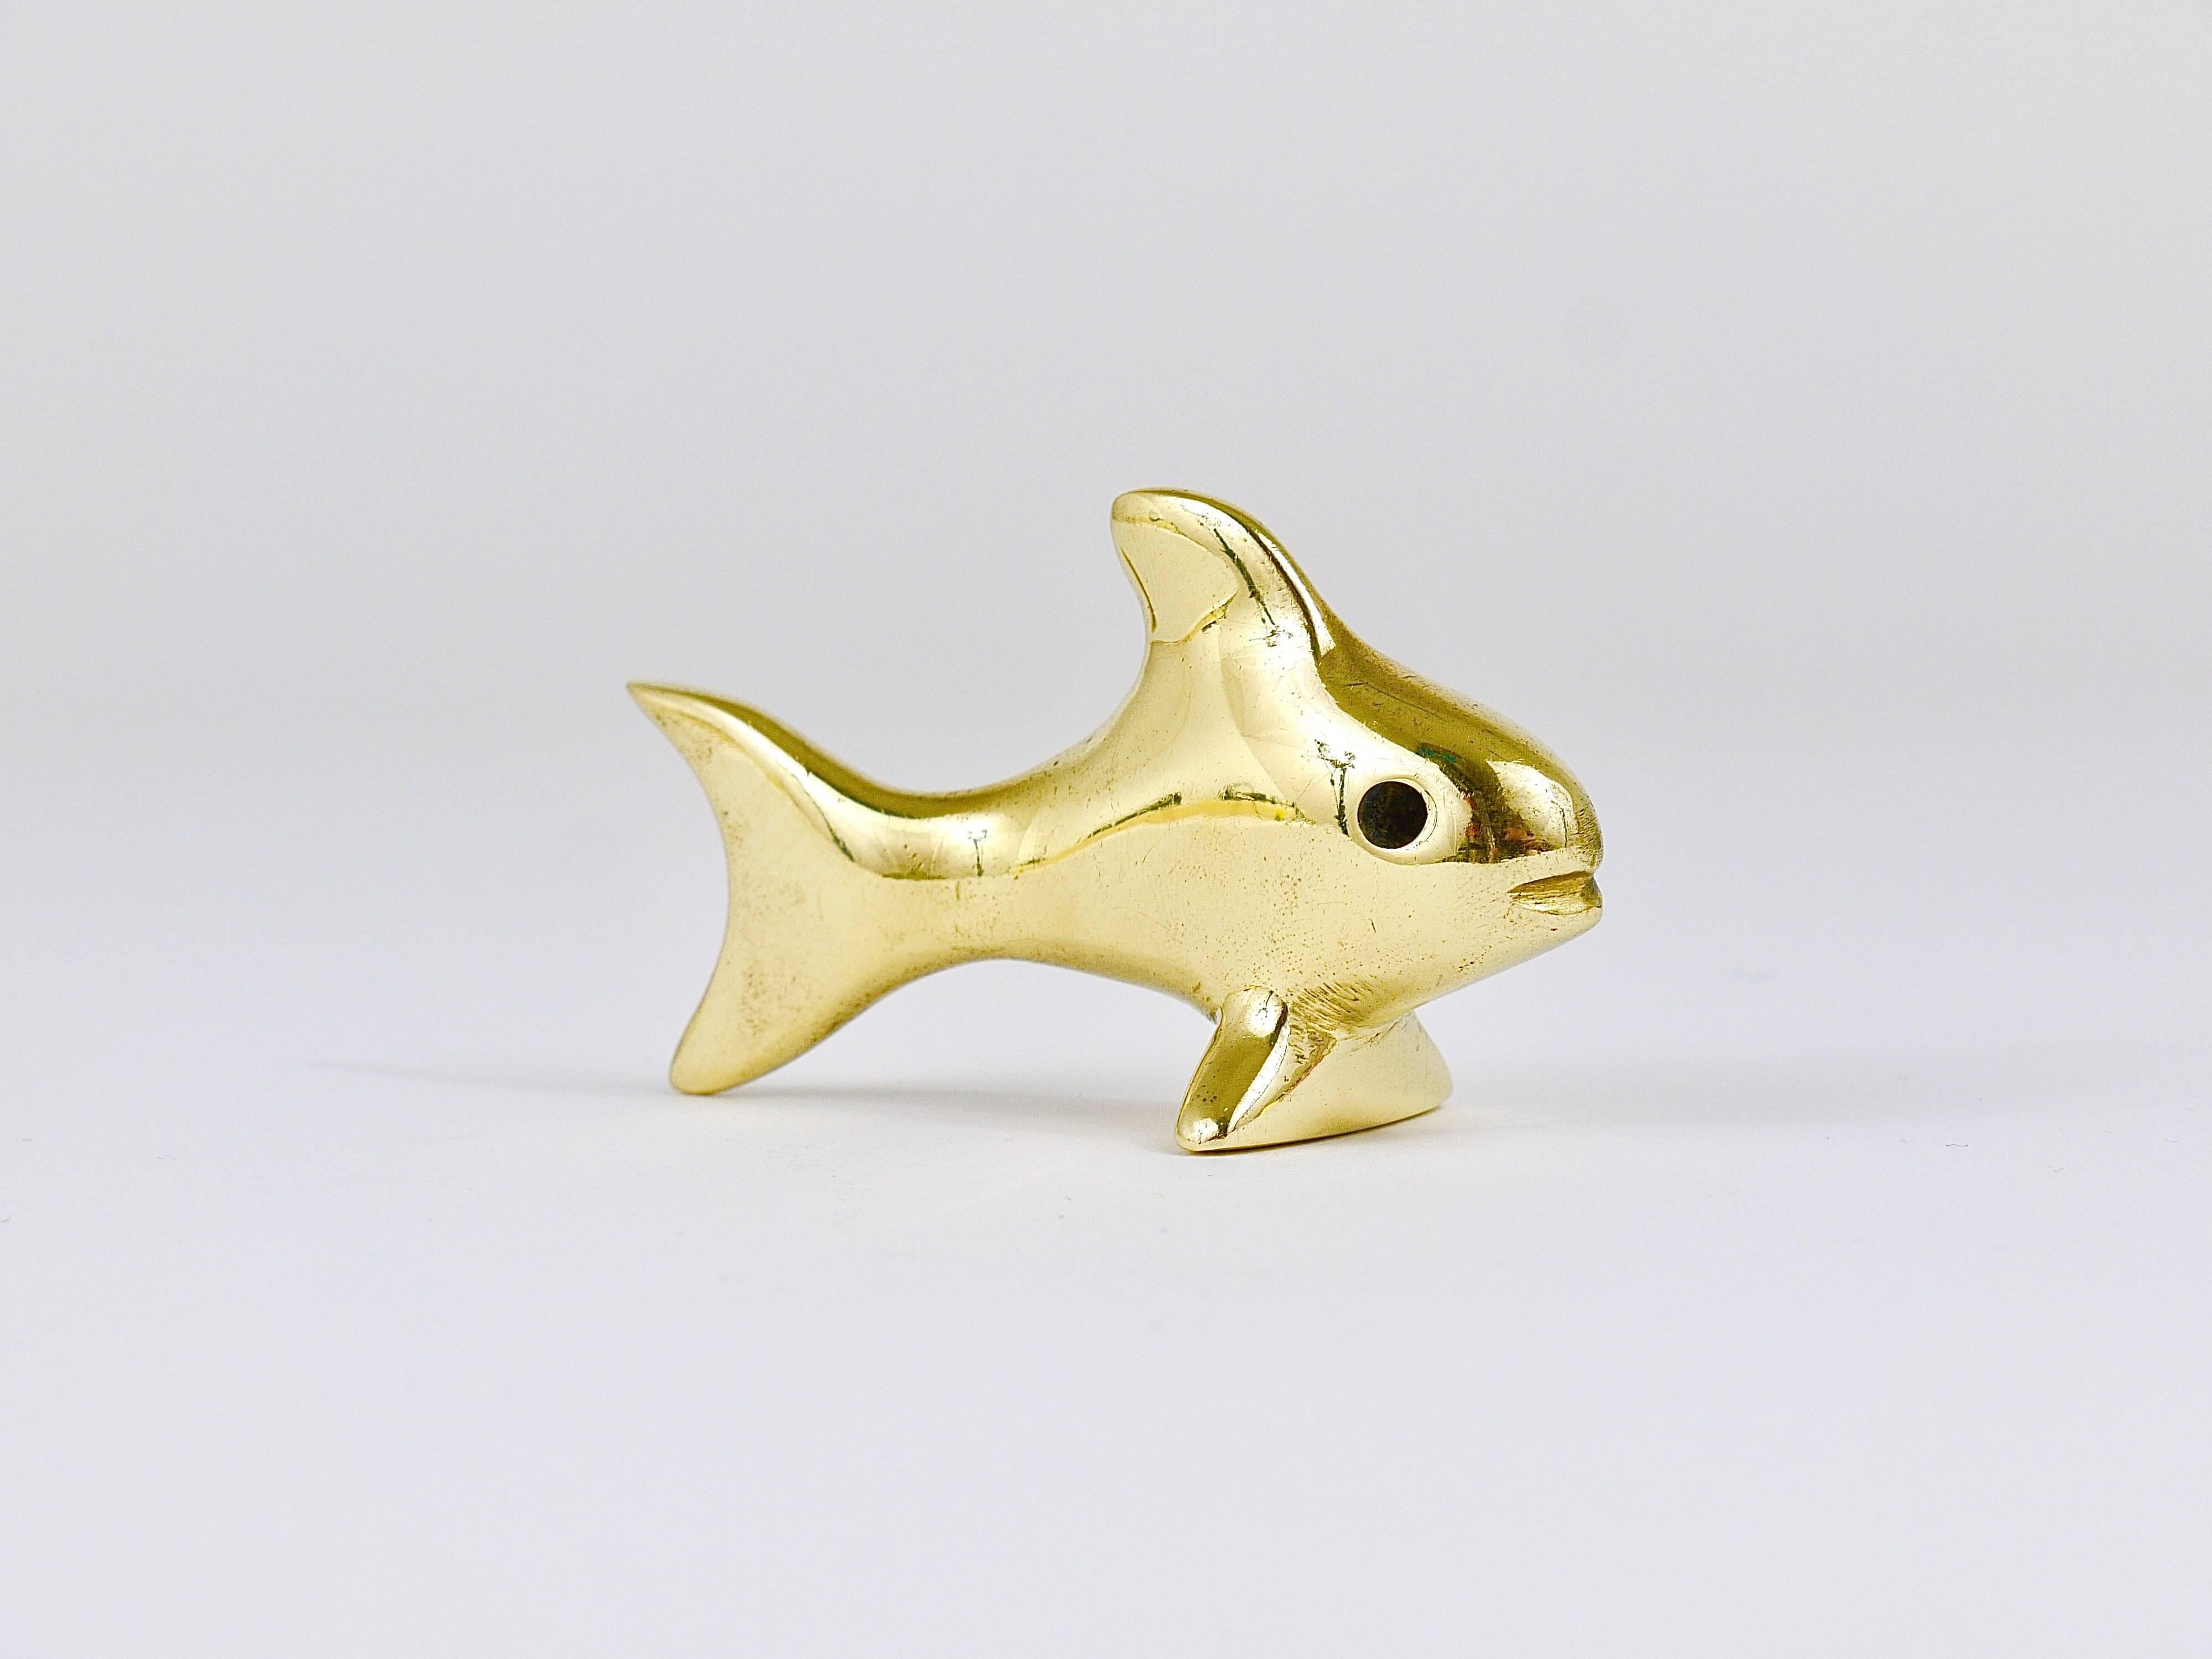 A lovely fish sculpture made of brass from the 1950s. Designed by Walter Bosse, executed by Hertha Baller. In very good condition with marginal patina.